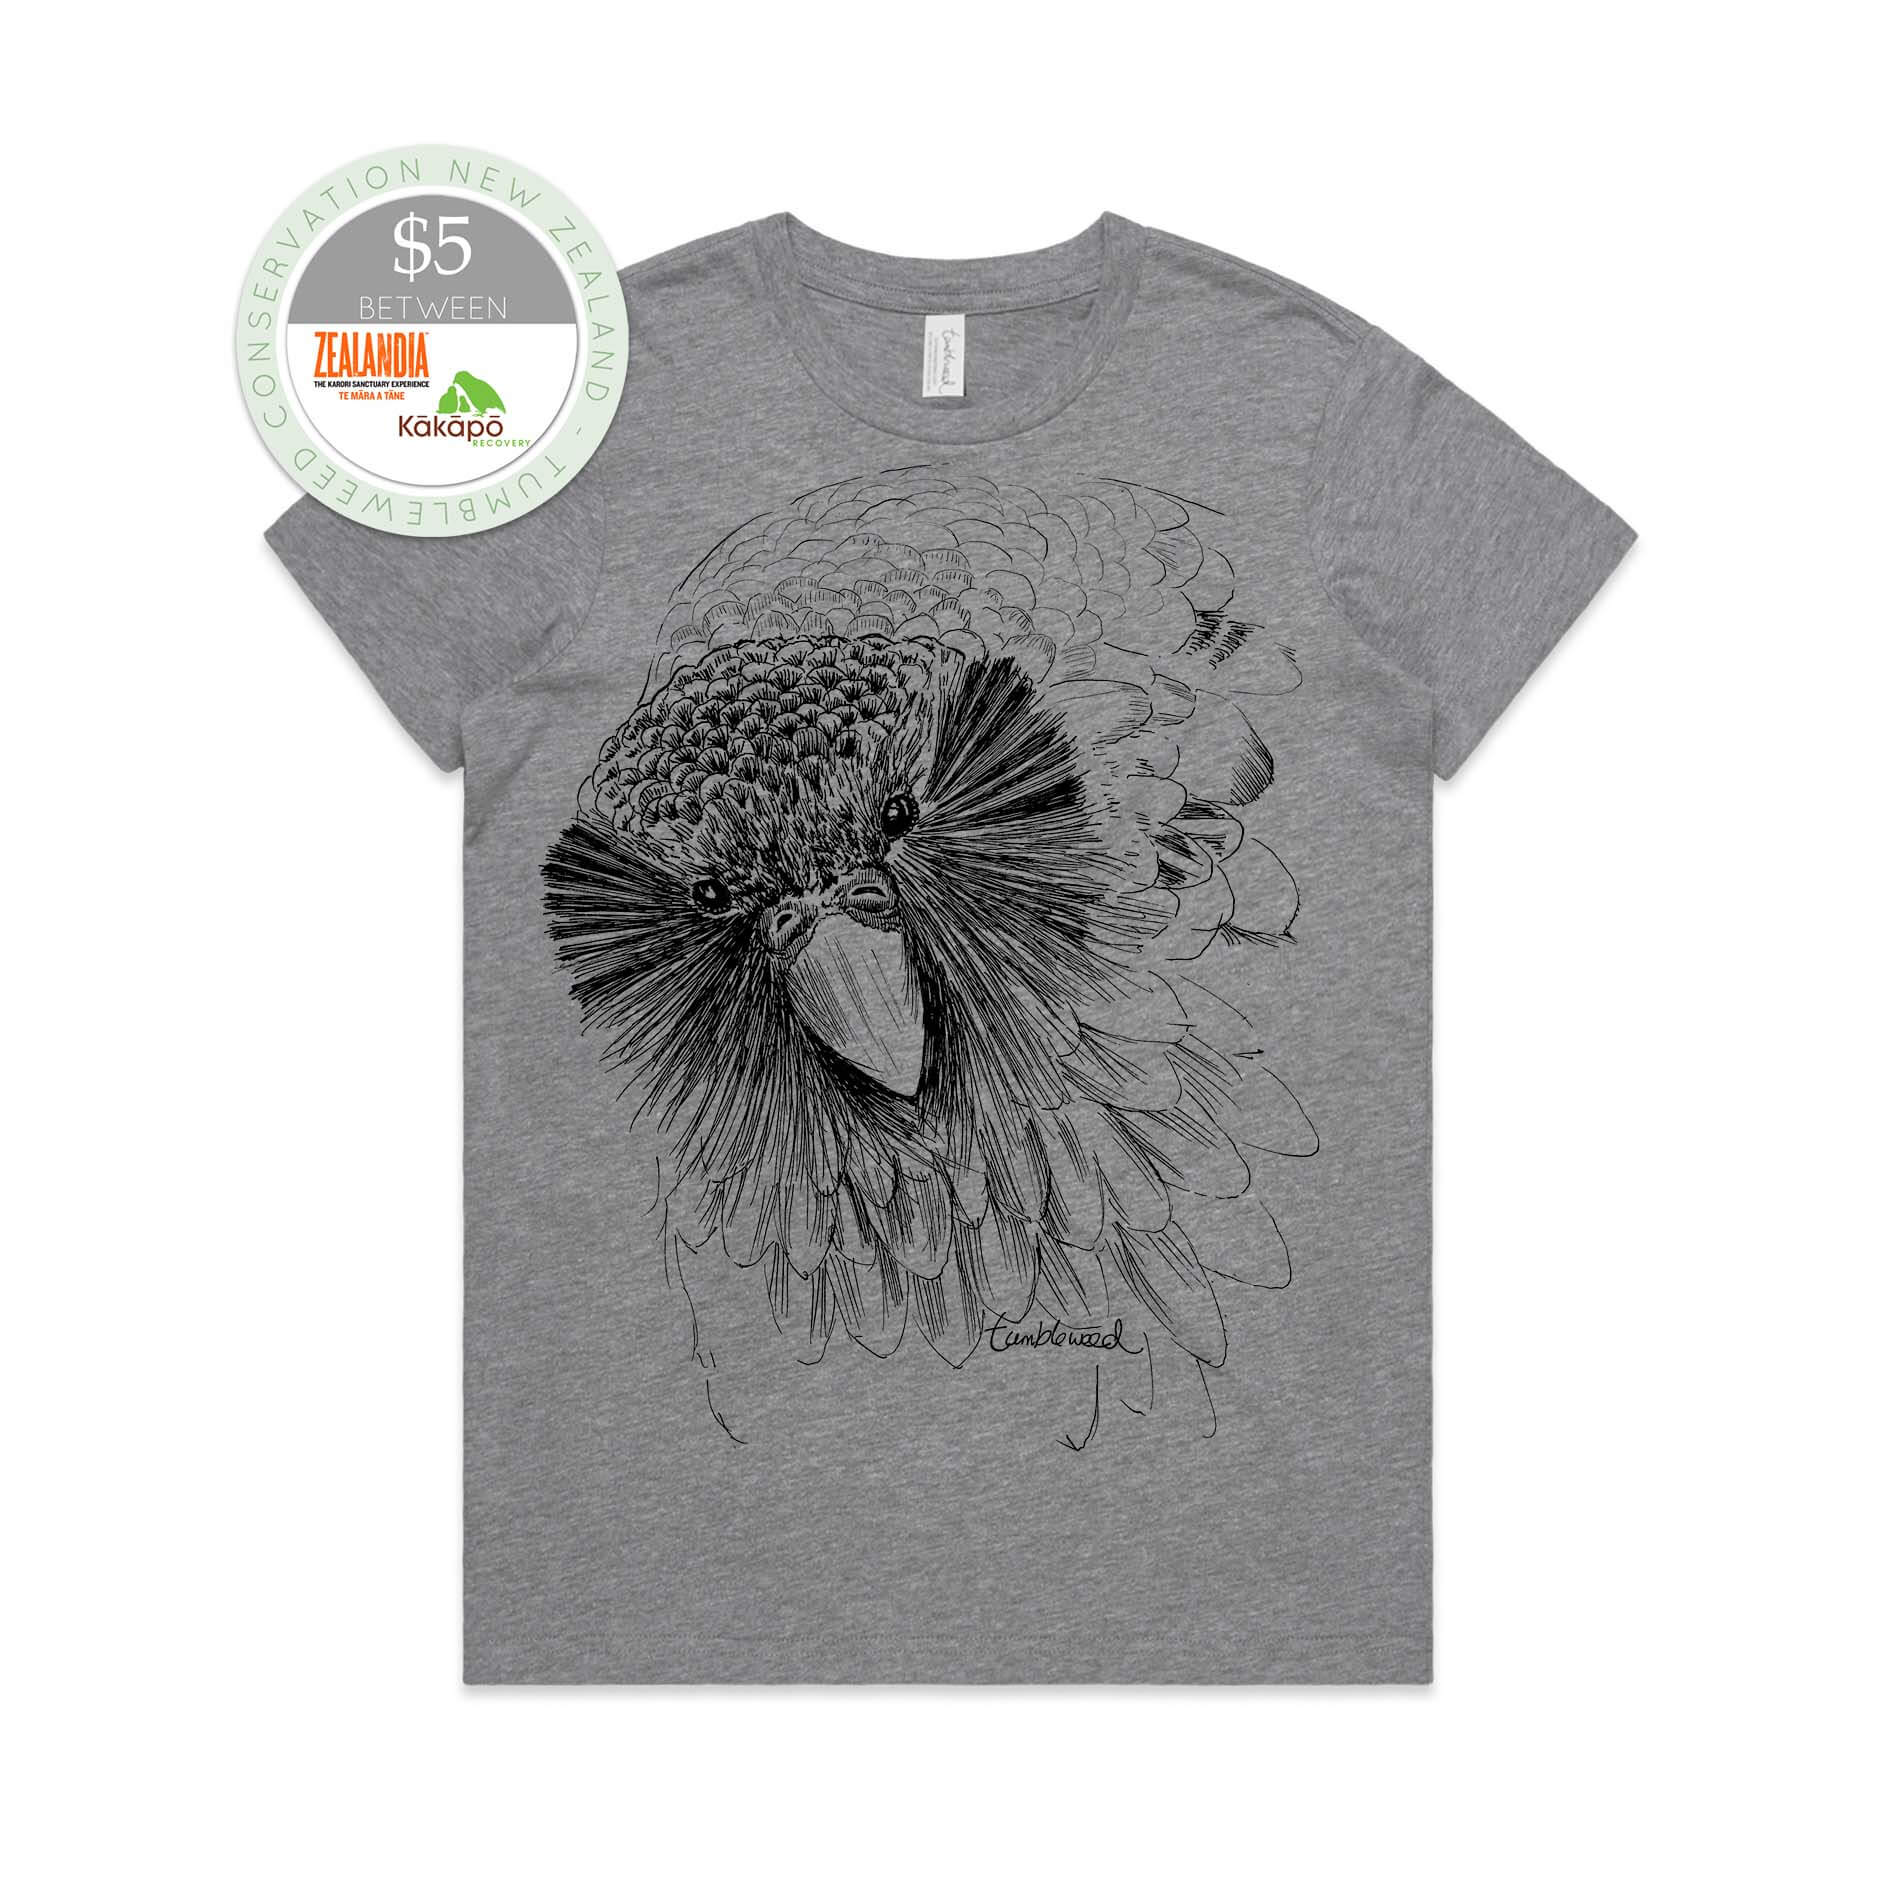 Grey marle, female t-shirt featuring a screen printed Sirocco the Kākāpō design.